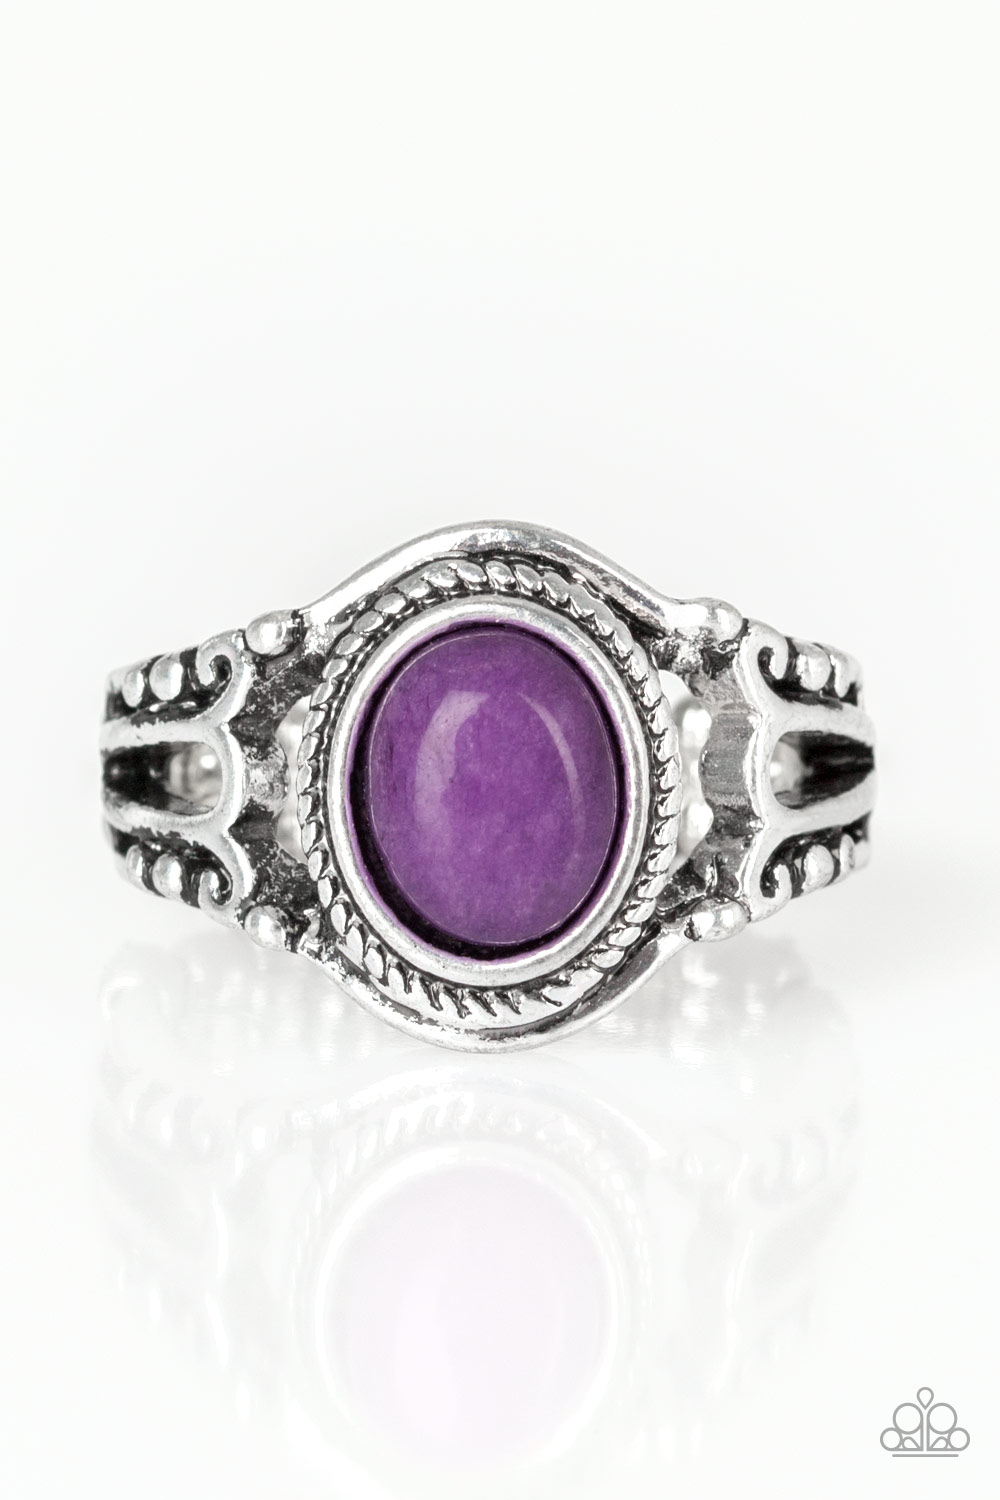 Paparazzi Accessories: Peacefully Peaceful - Purple | Paparazzi Accessories